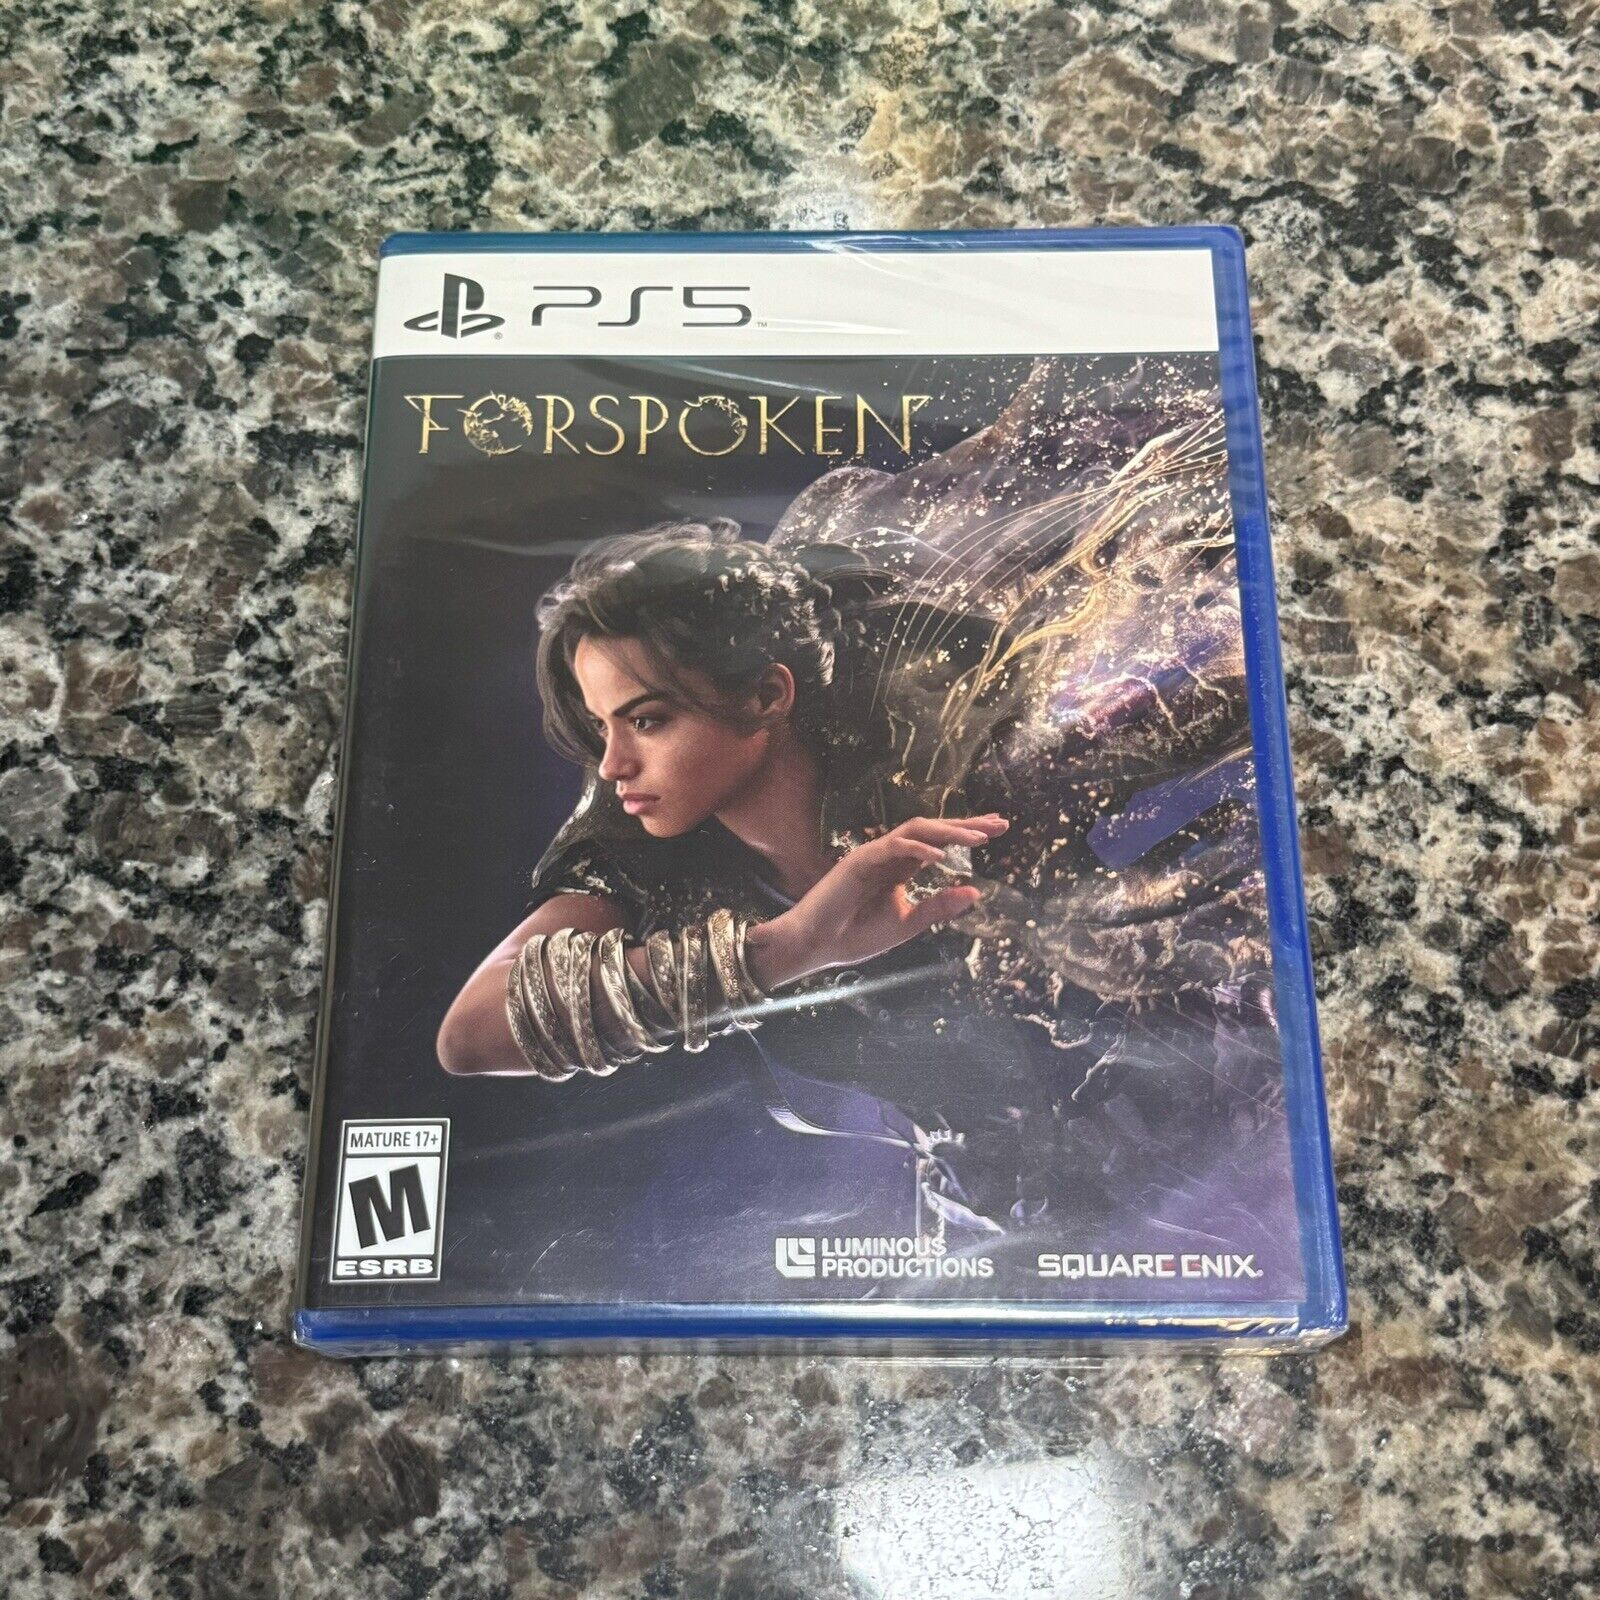 Forspoken - Sony PlayStation 5 PS5 LOOSE DISC INSIDE - Sealed Brand New